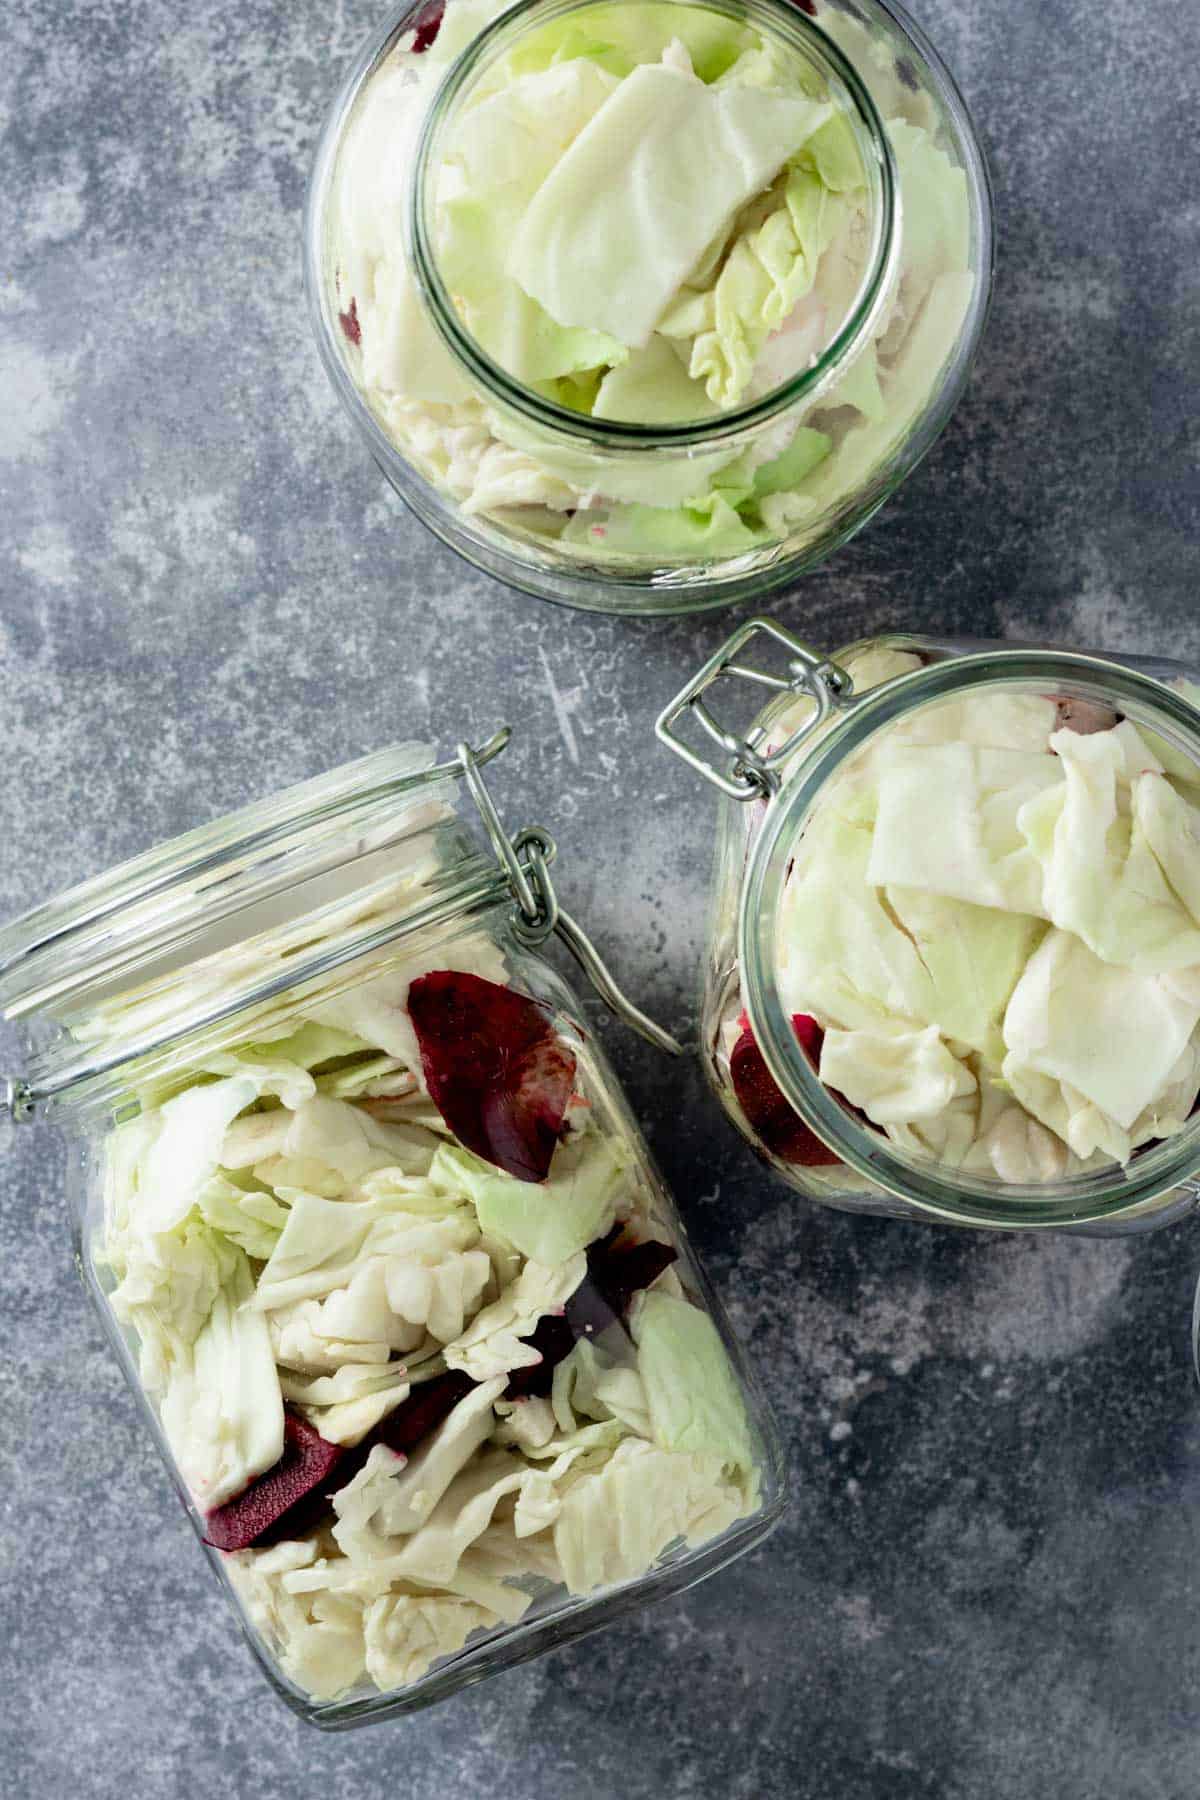 cabbage and beets stuffed in jars with pickling brine.